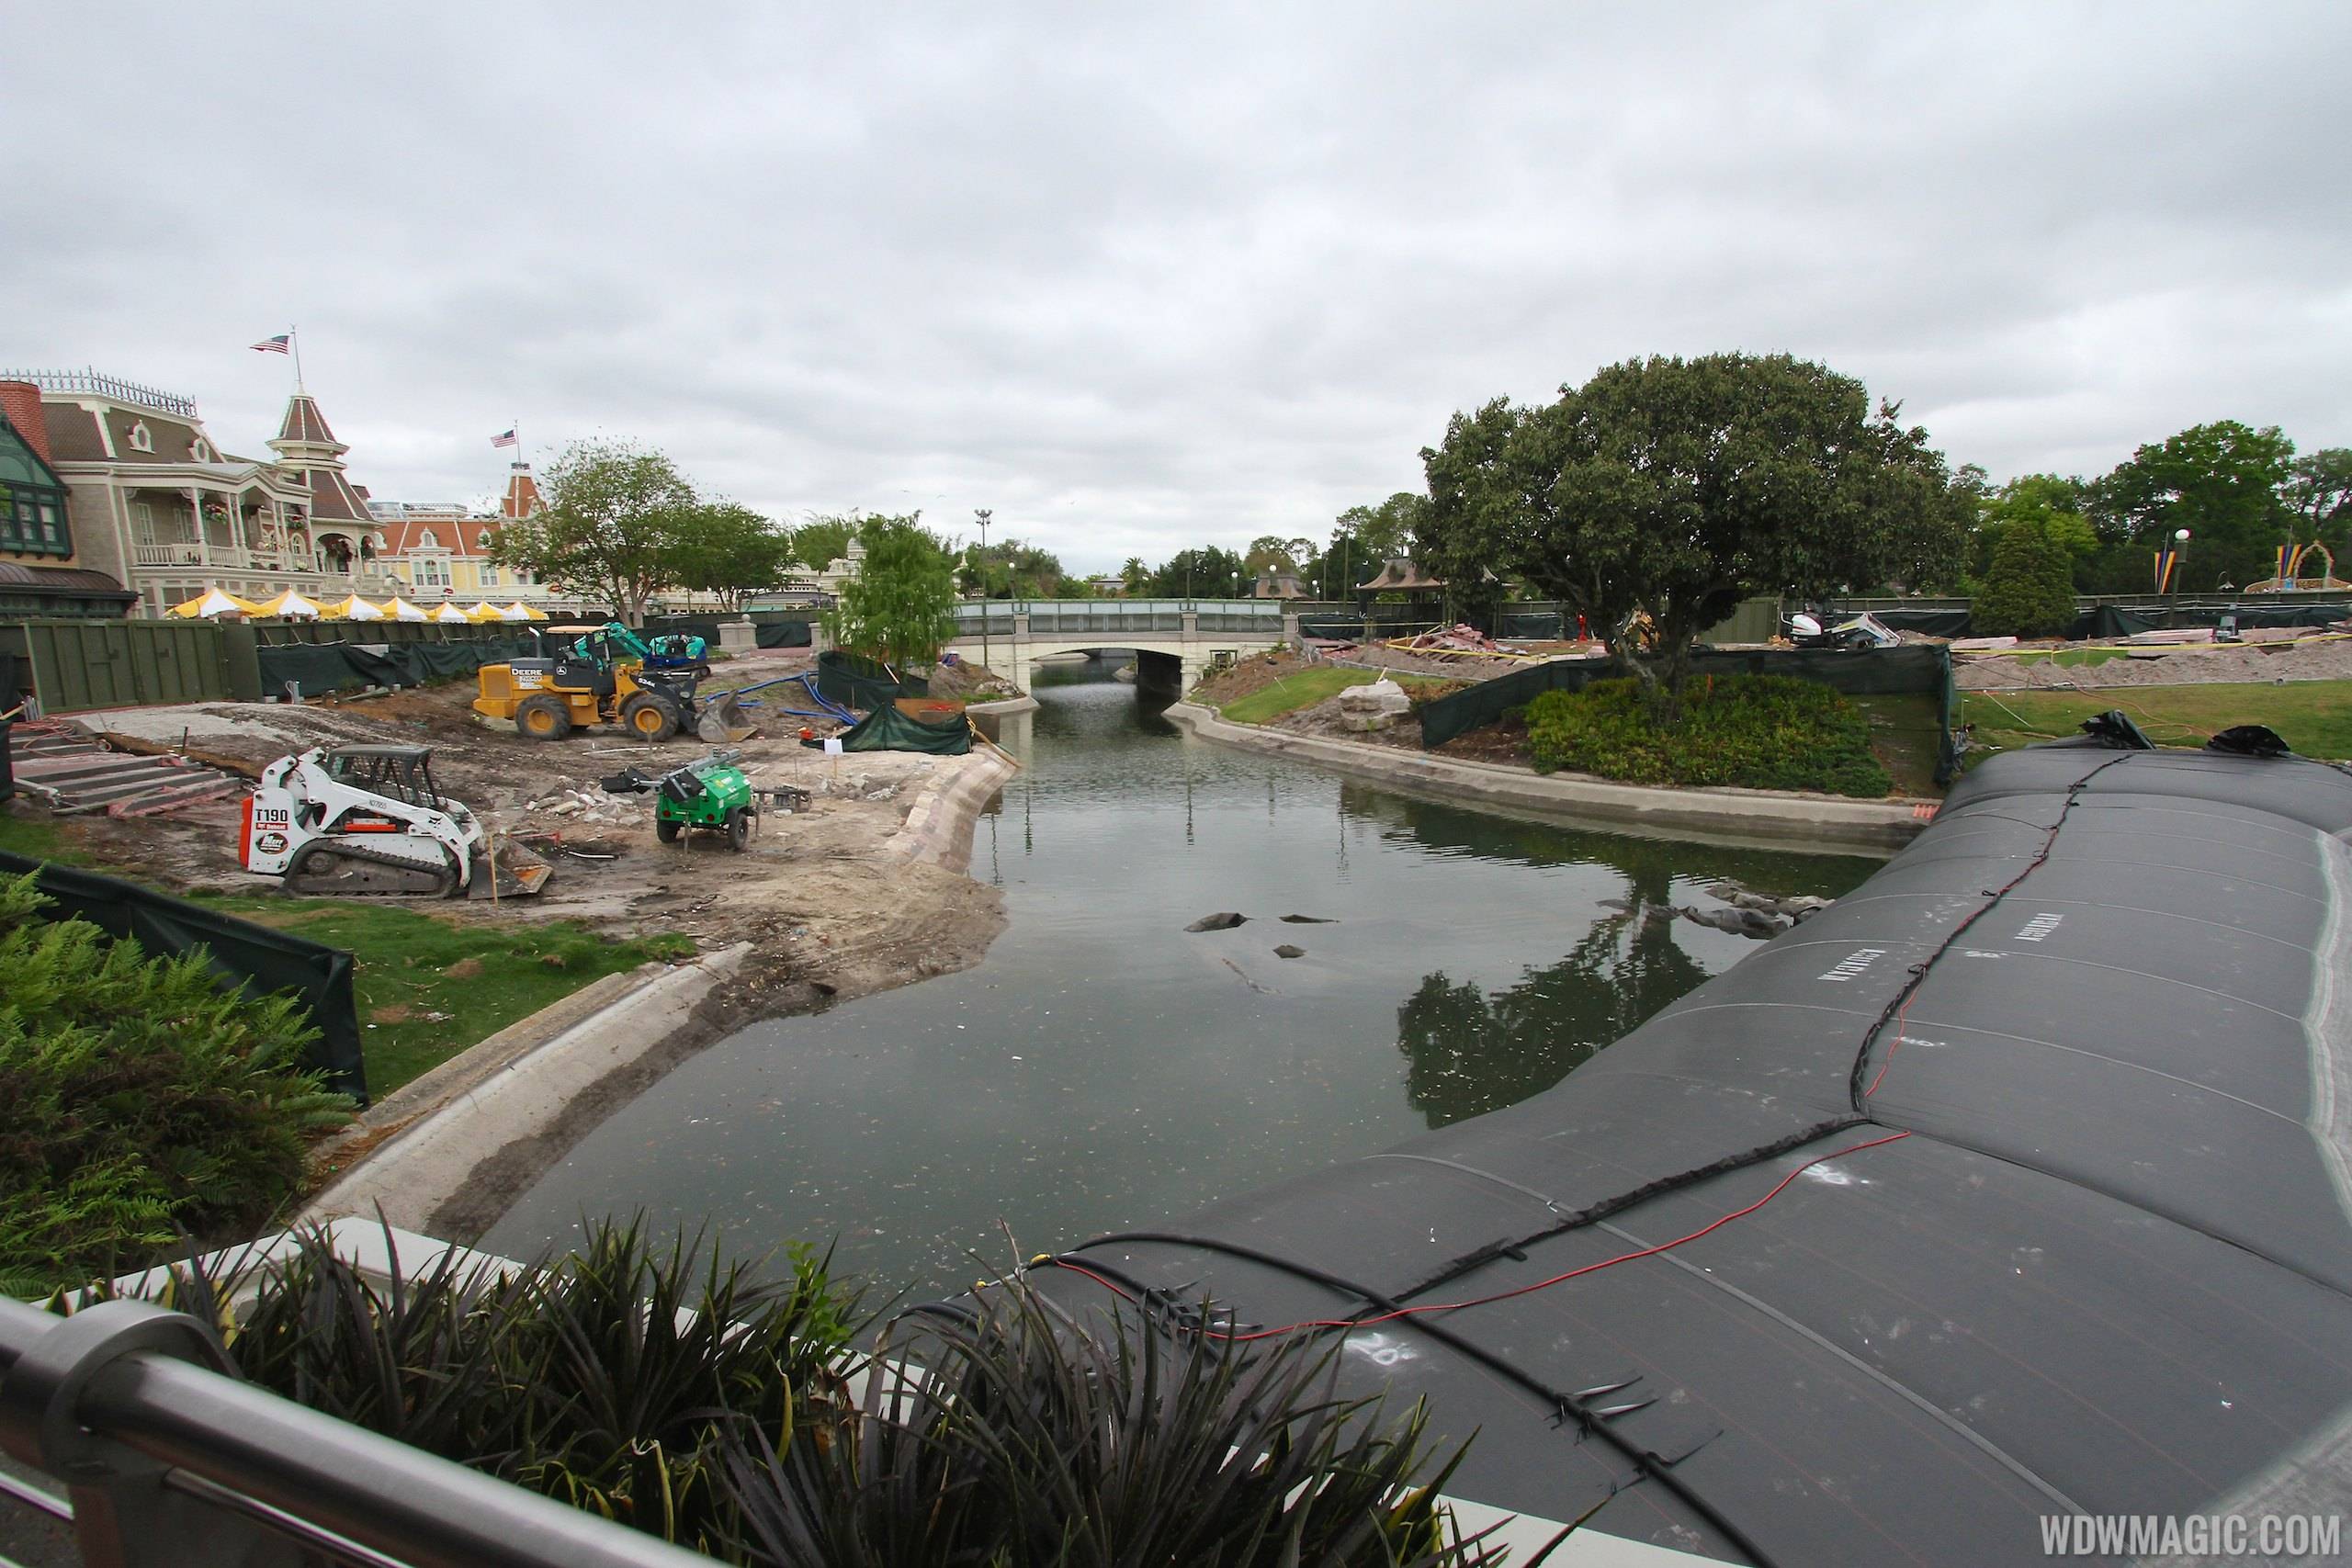 PHOTOS - Dams installed on the Magic Kingdom's waterways to begin major work on the hub layout